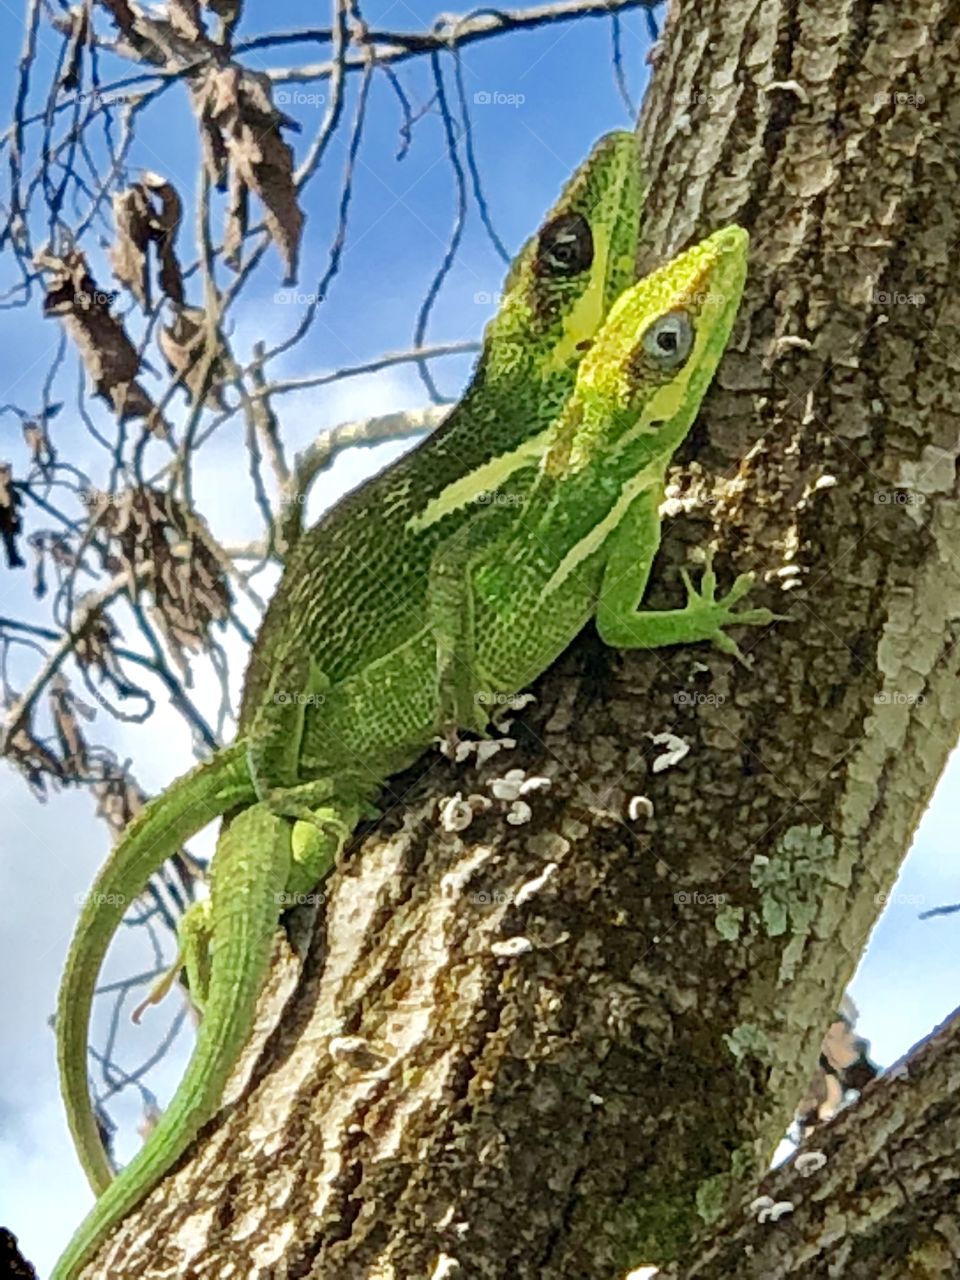 Knight anoles